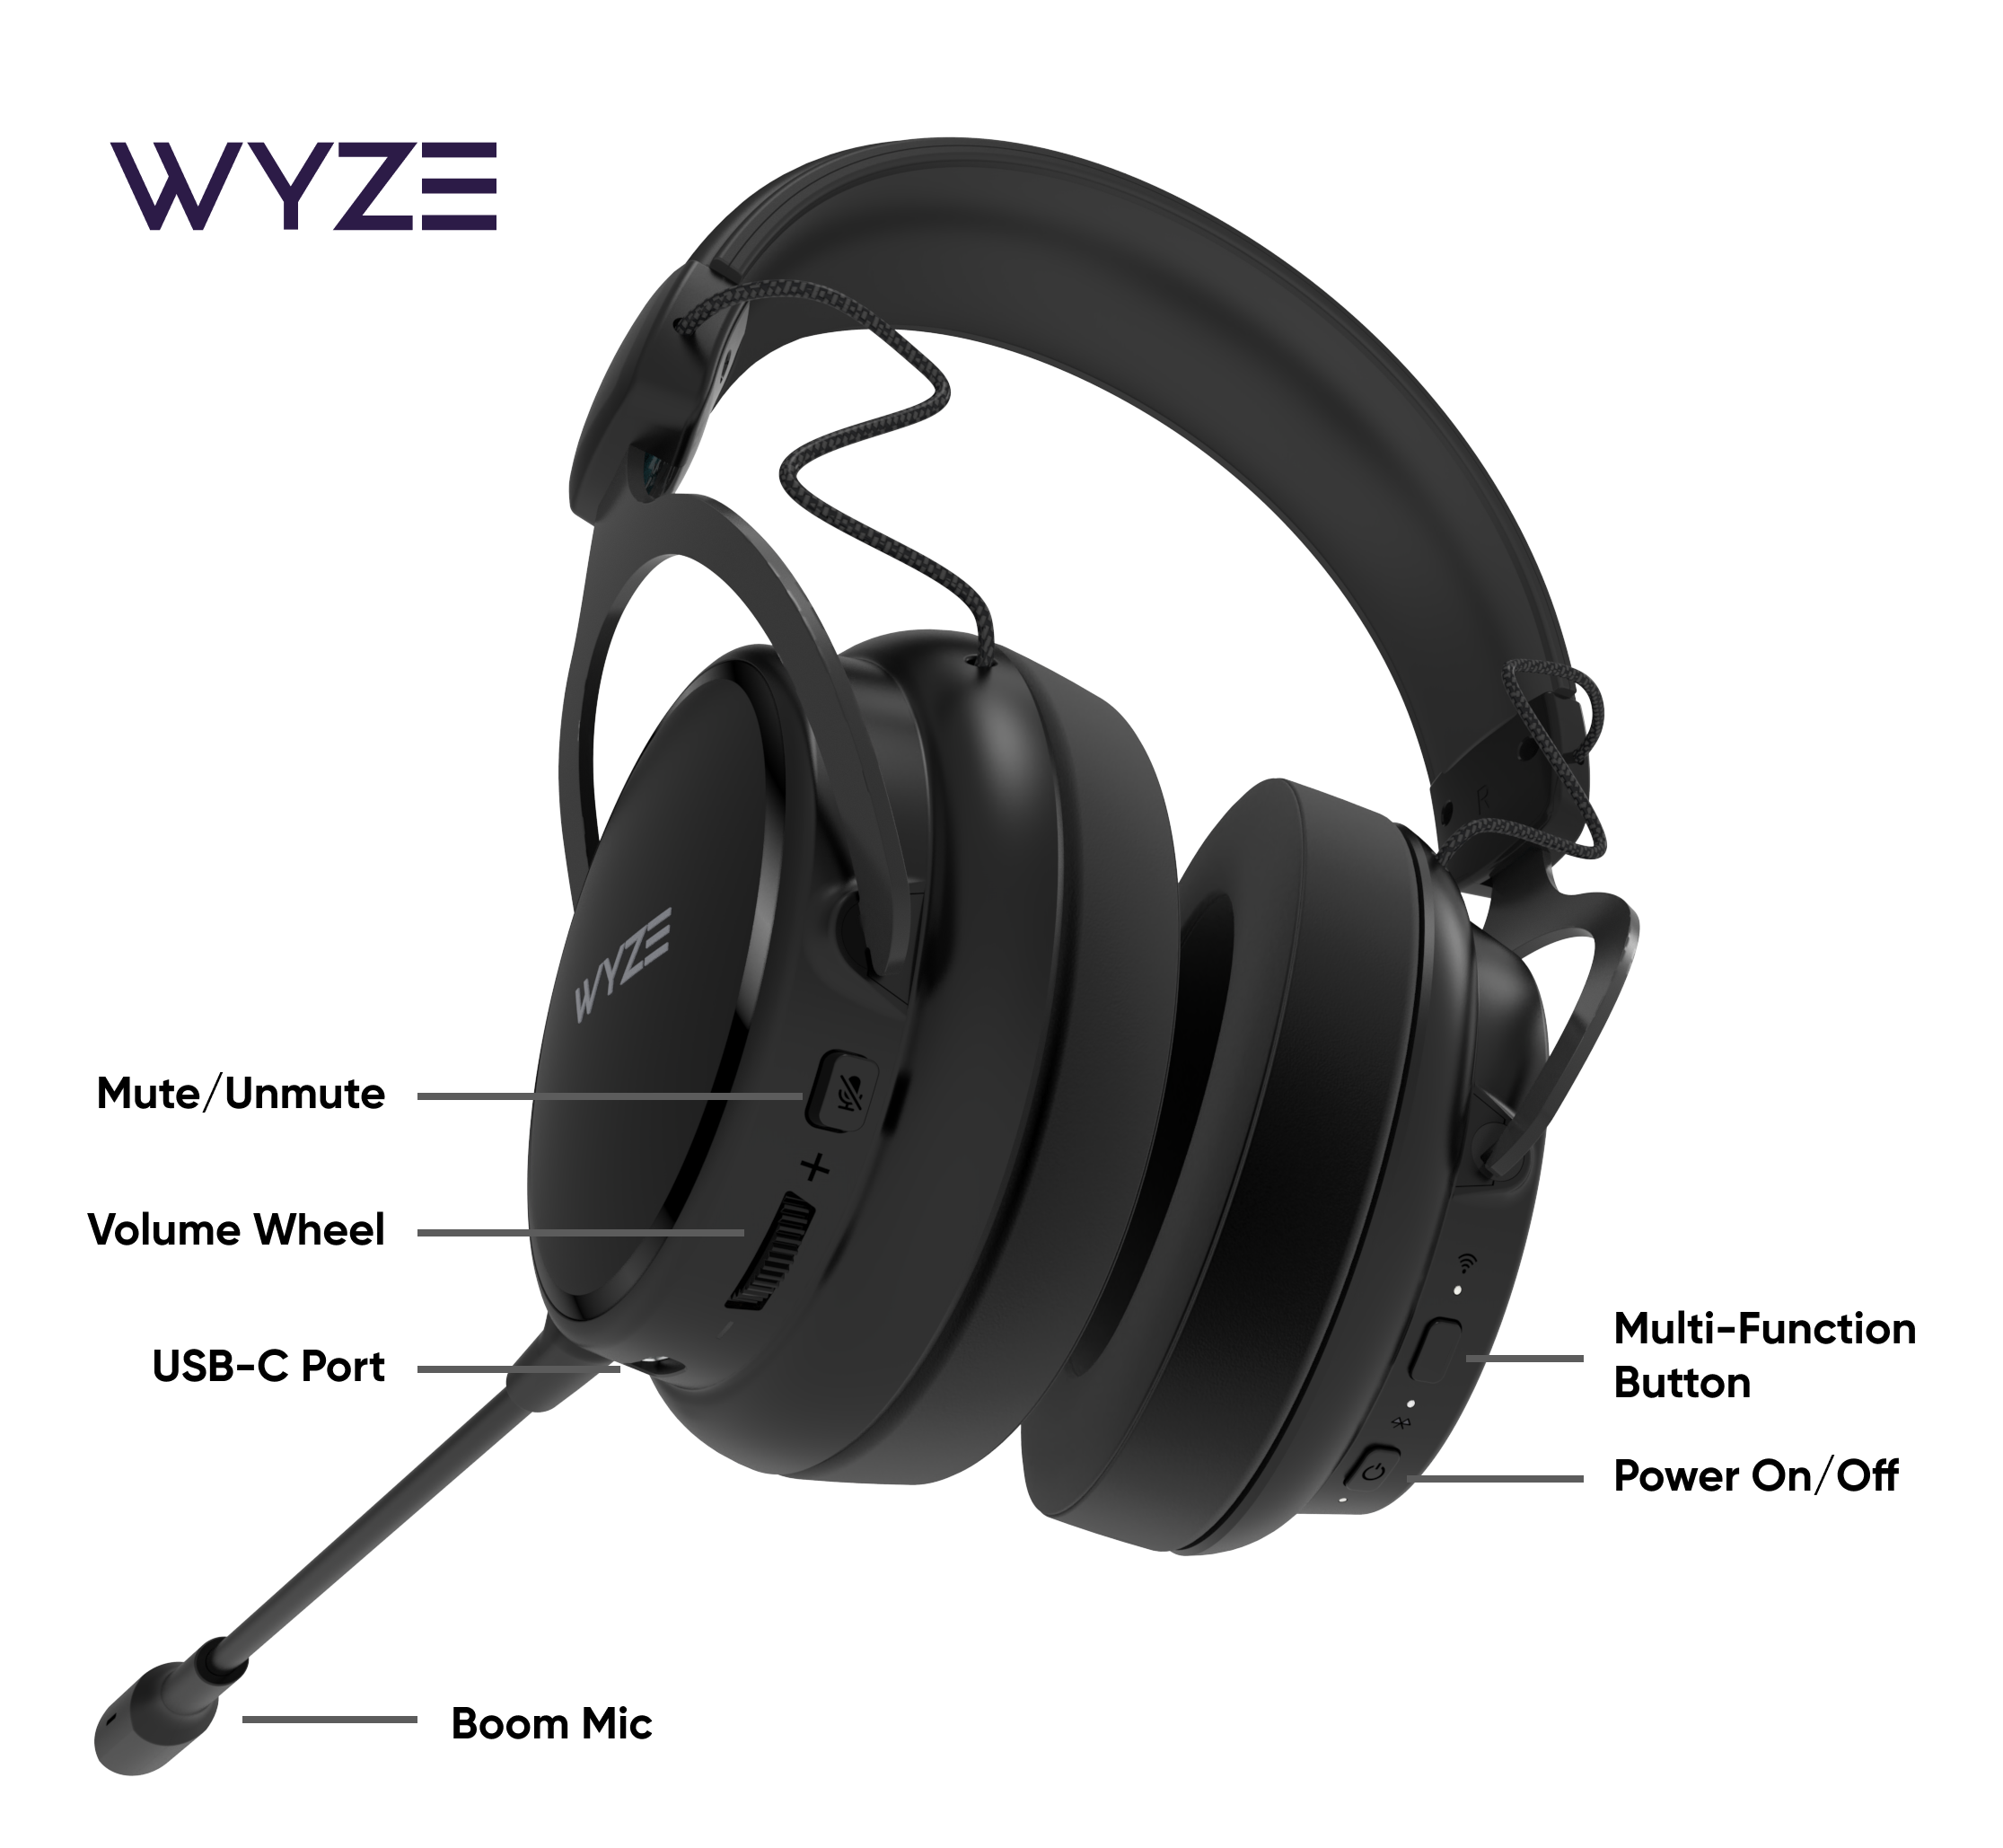 Wyze_Wireless_Gaming_Headset_diagram.png